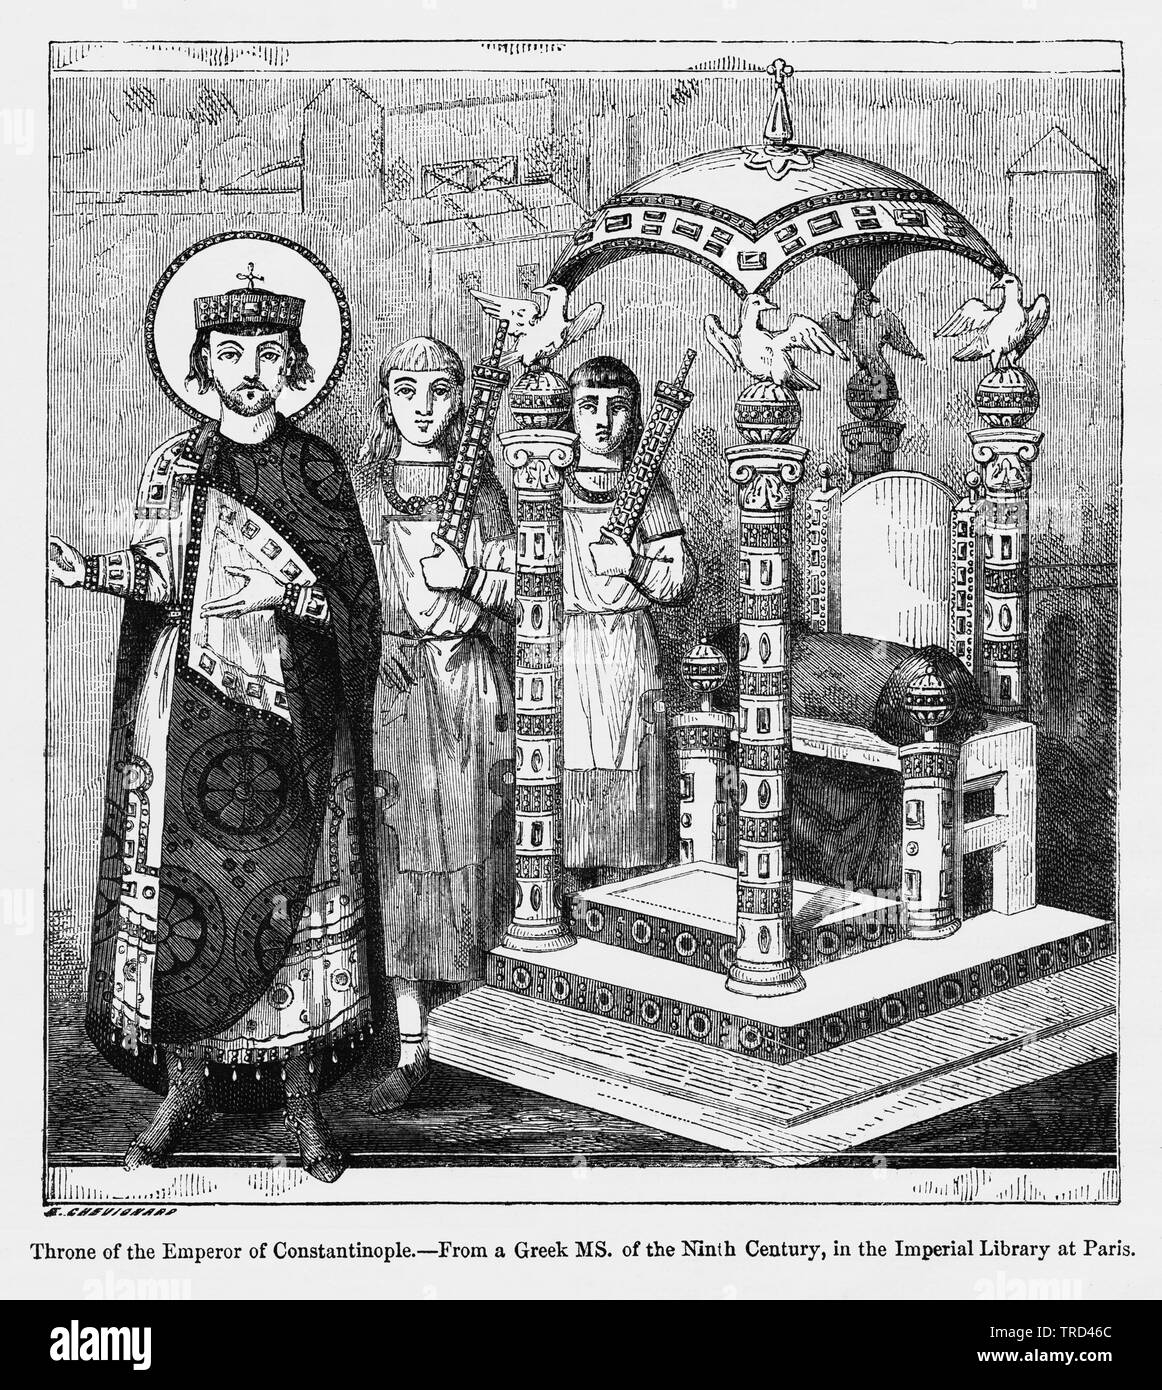 Throne of the Emperor of Constantinople, from a Greek Manuscript of the Ninth Century, in the Imperial Library of Paris, Illustration from John Cassell's Illustrated History of England, Vol. I from the earliest period to the reign of Edward the Fourth, Cassell, Petter and Galpin, 1857 Stock Photo